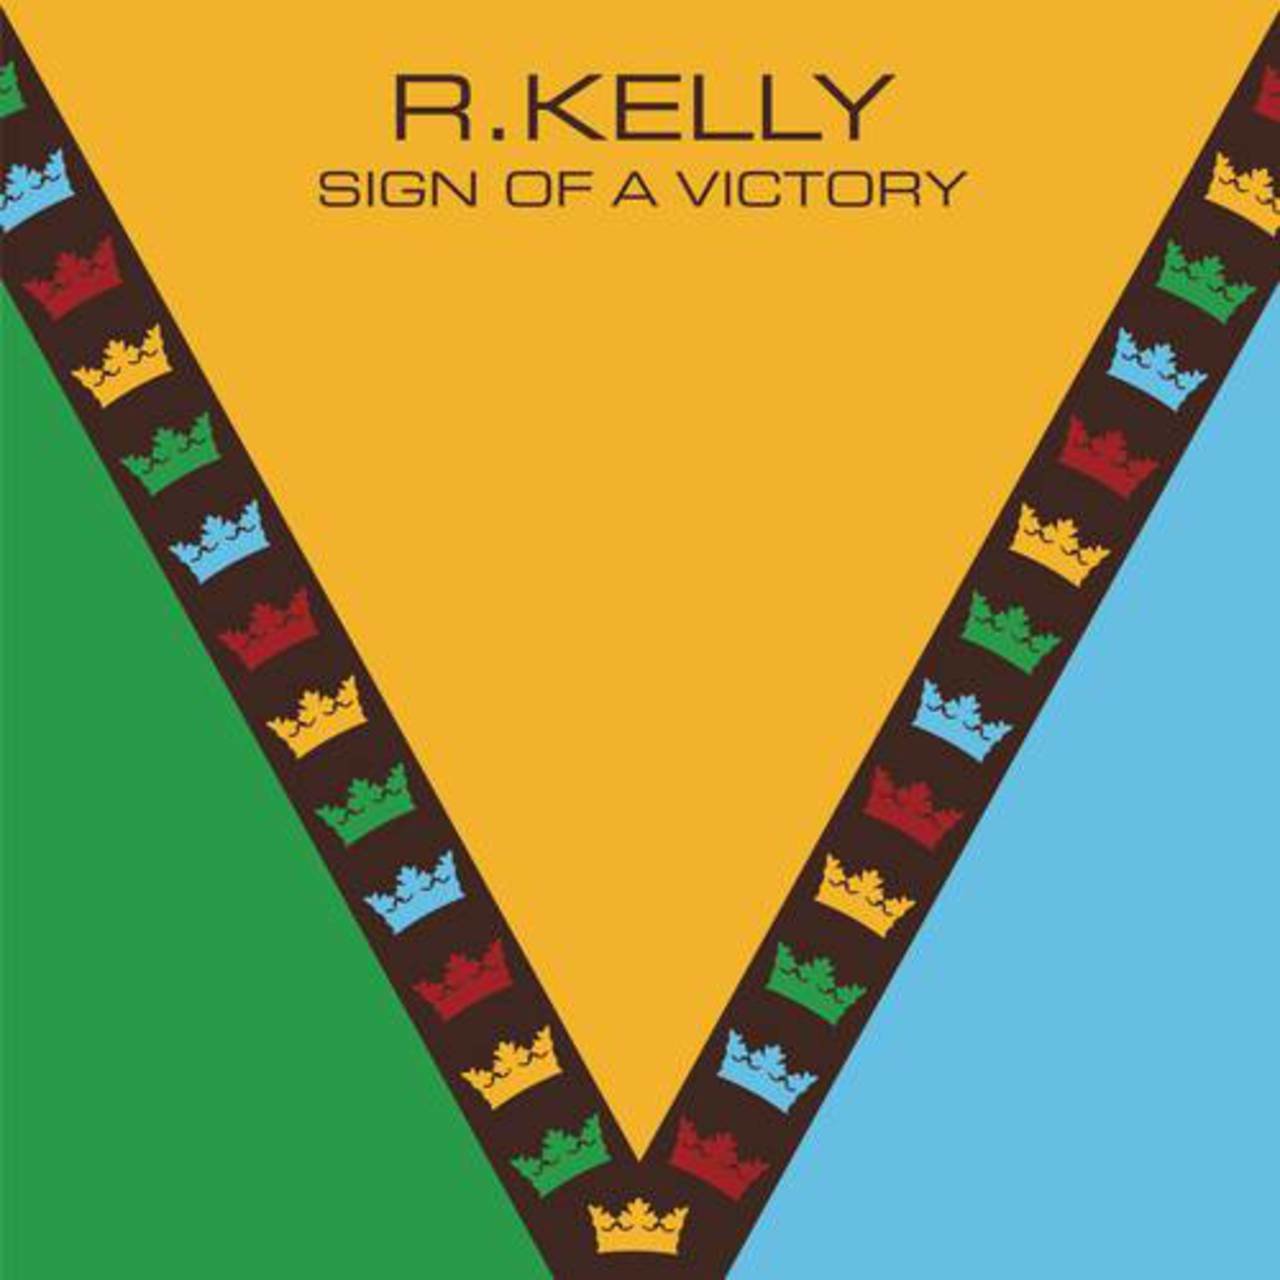 R. Kelly - Sign Of A Victory (ft. Soweto Spiritual Singers) (Cover)